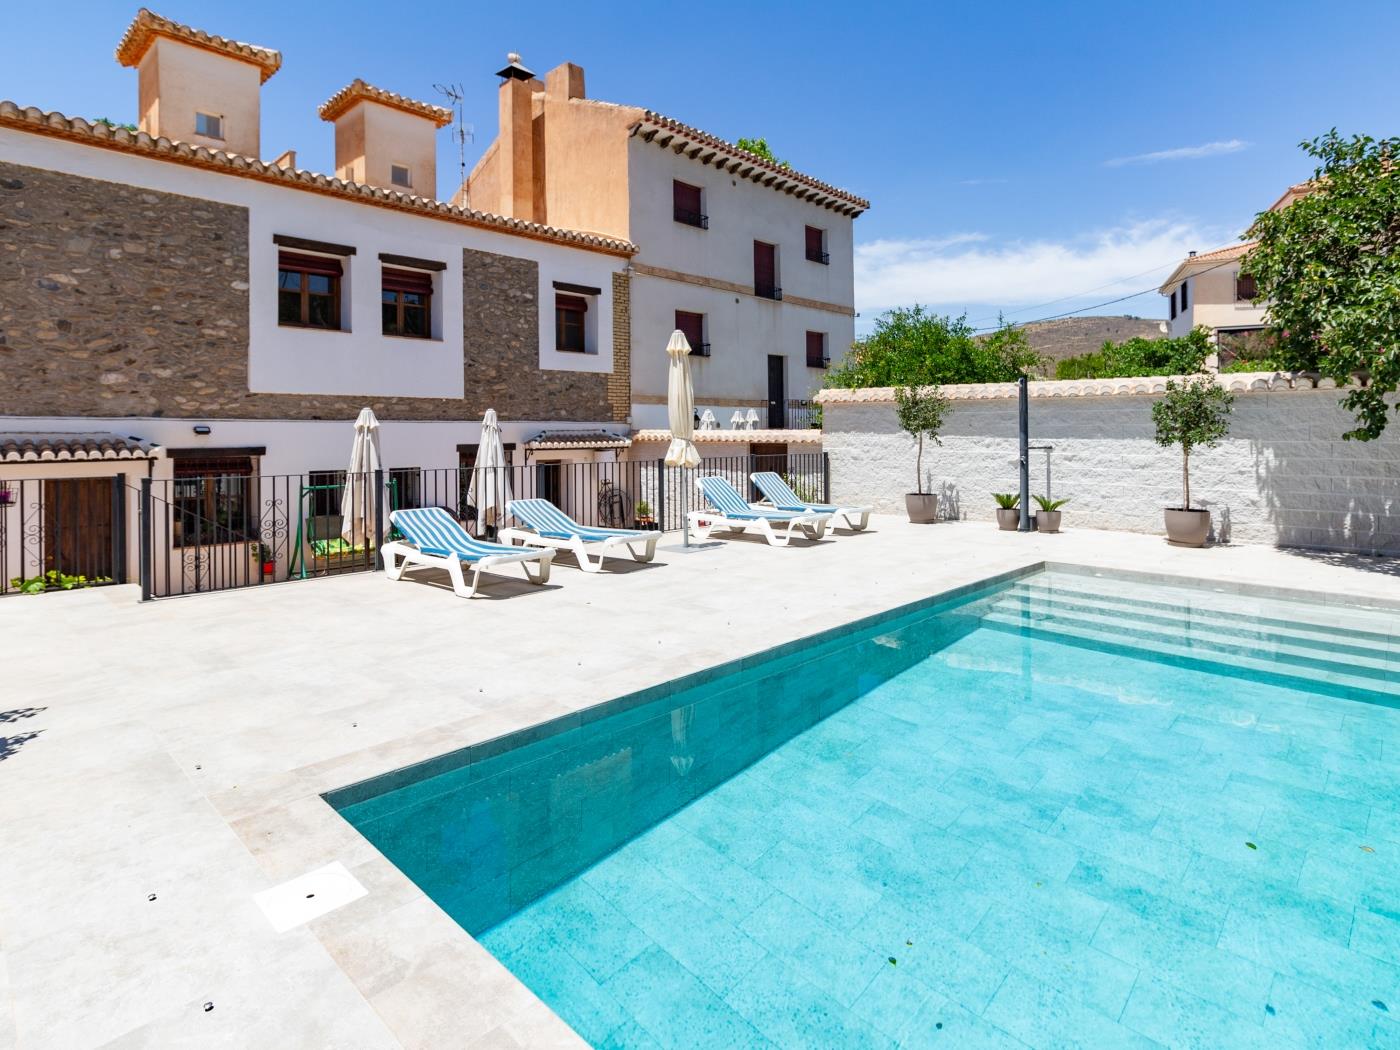 Complex of 2 houses with swimming pool, in Melegís